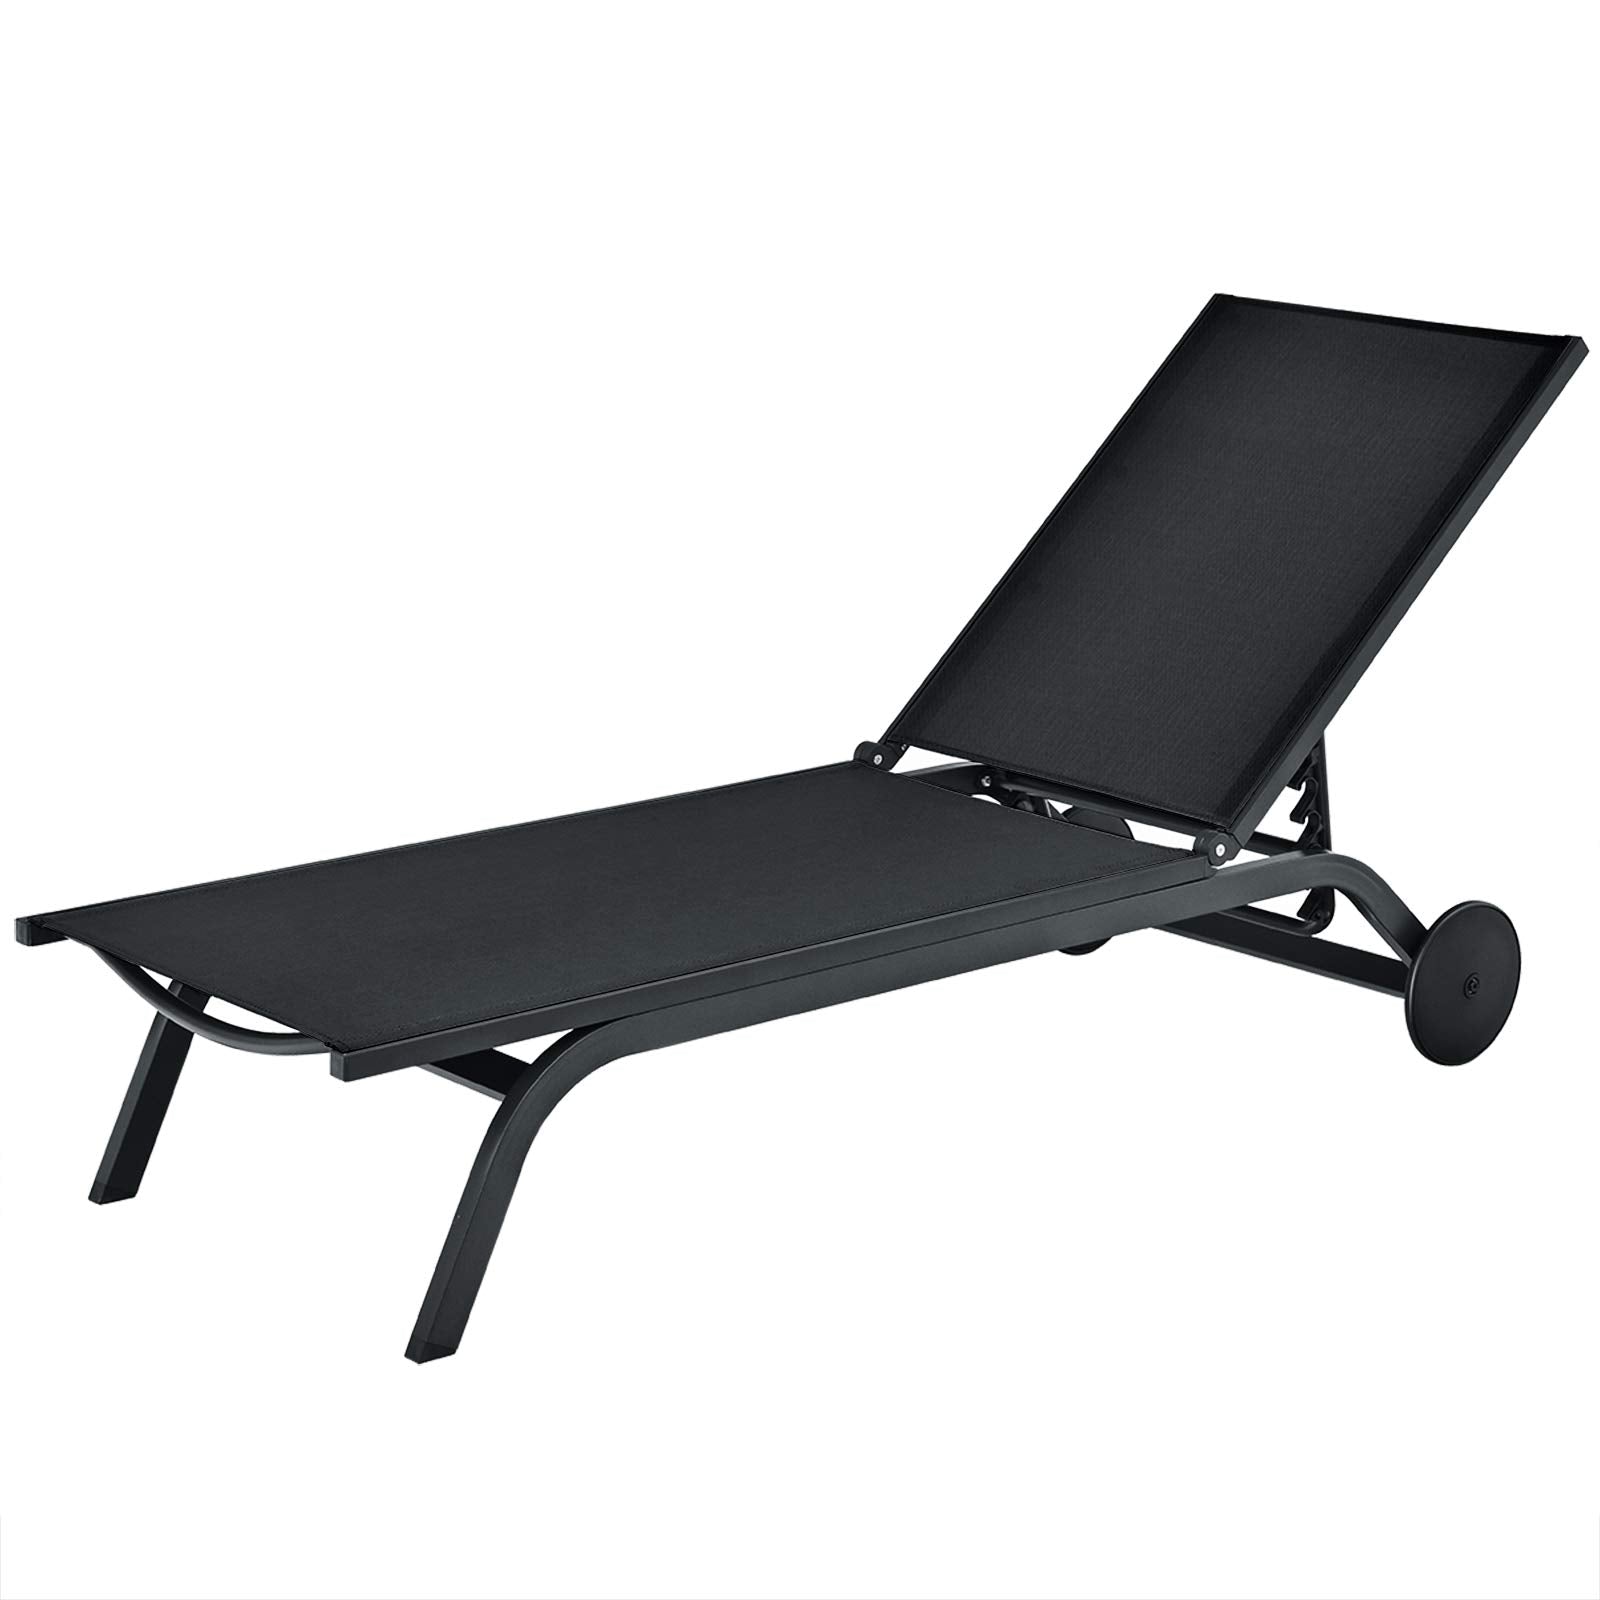 Outdoor Aluminum Chaise Lounge, Patio Lounge Recliner Chair